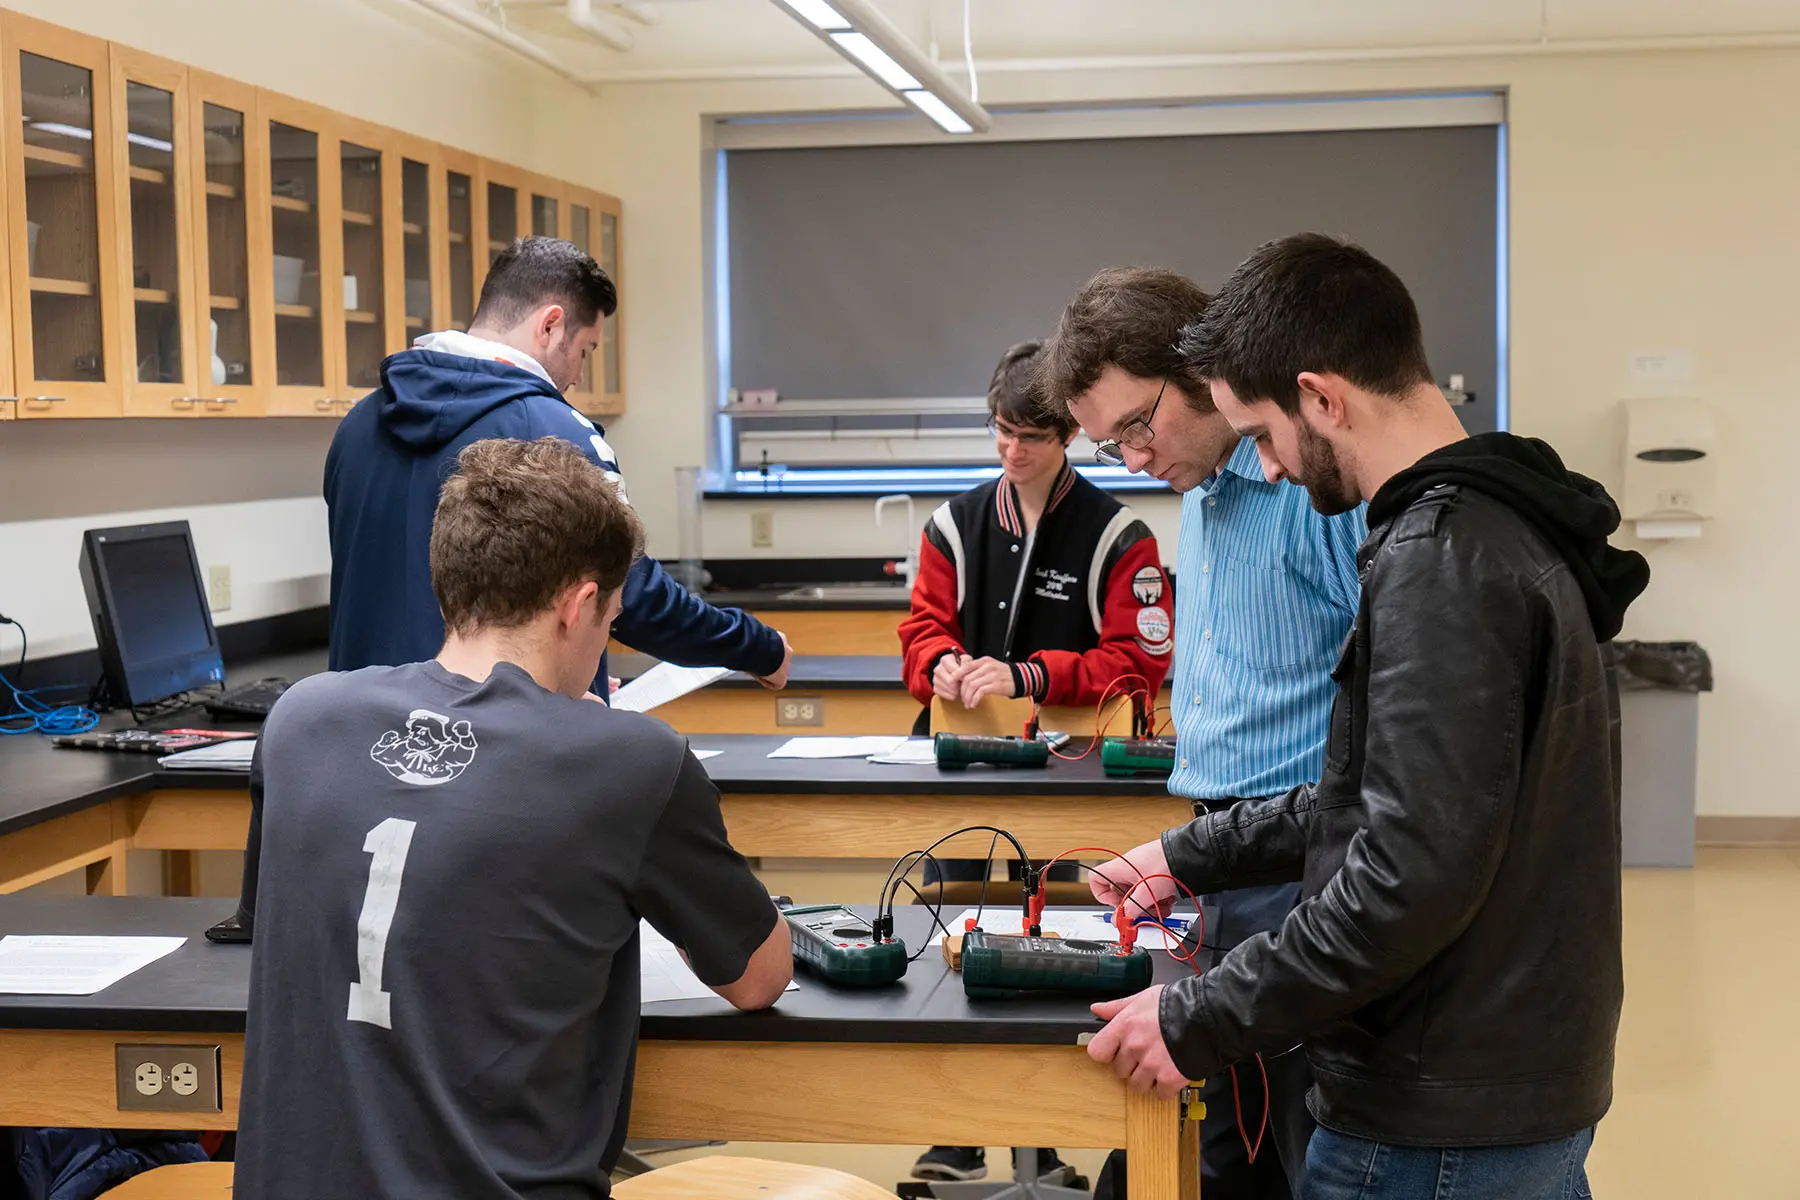 Students working on a project in an engineering lab